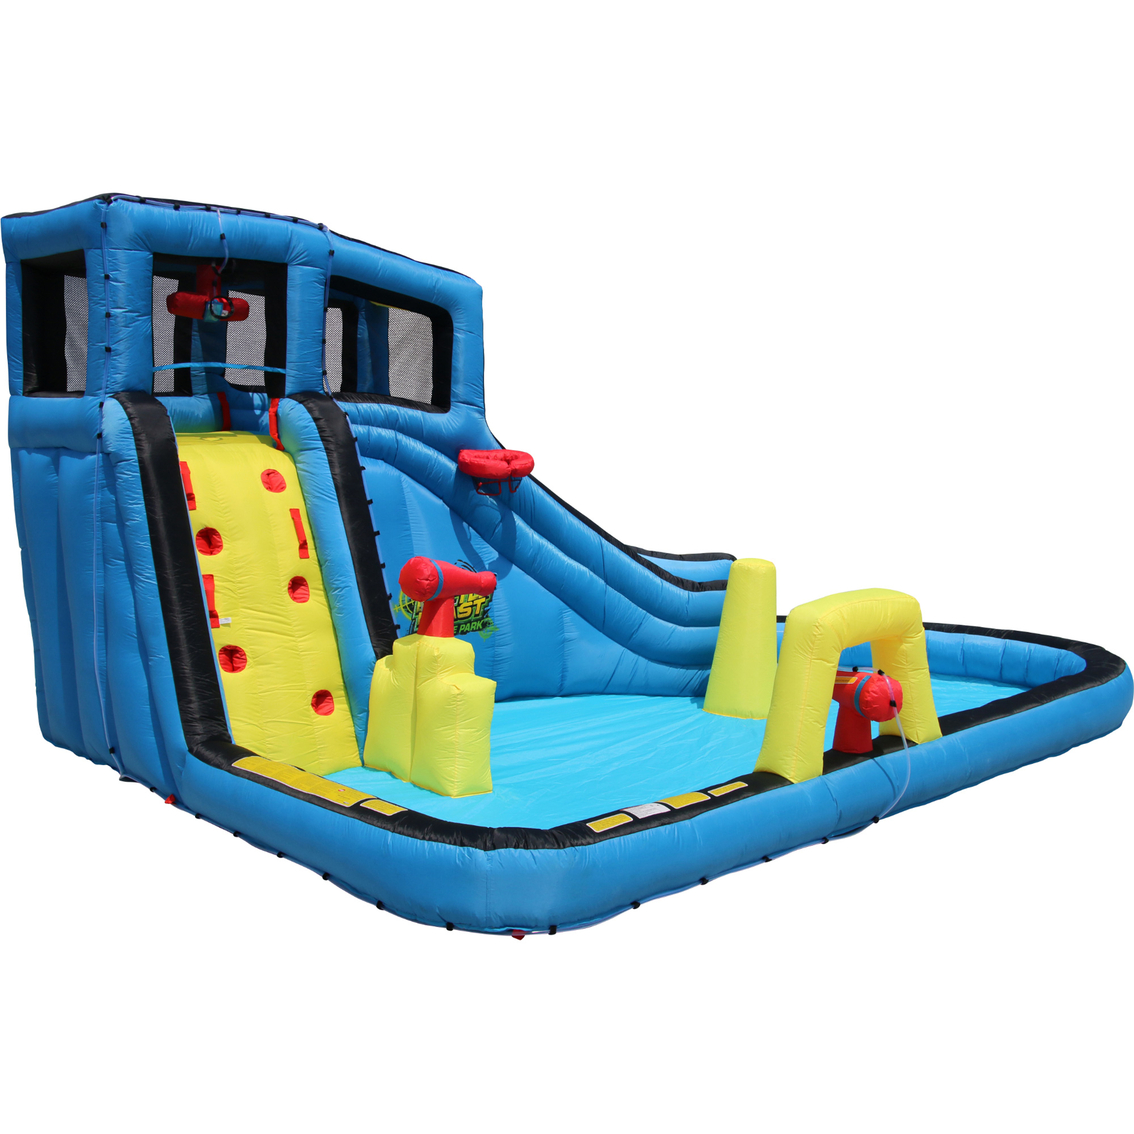 Banzai Battle Blast Inflatable Water Park Play Center - Image 4 of 9